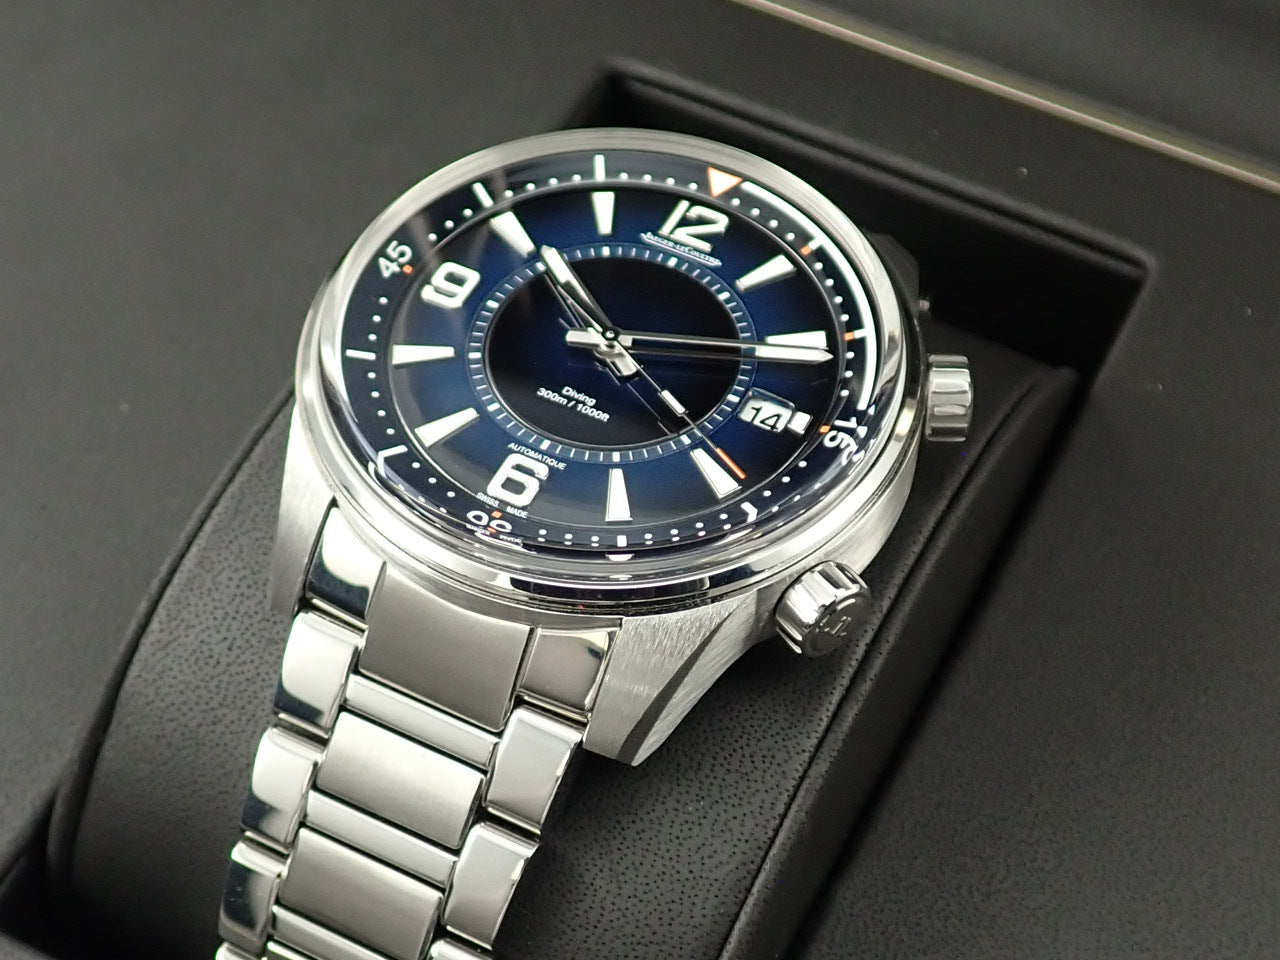 Jaeger-LeCoultre Polaris Mariner Date &lt;Warranty box and other details&gt;